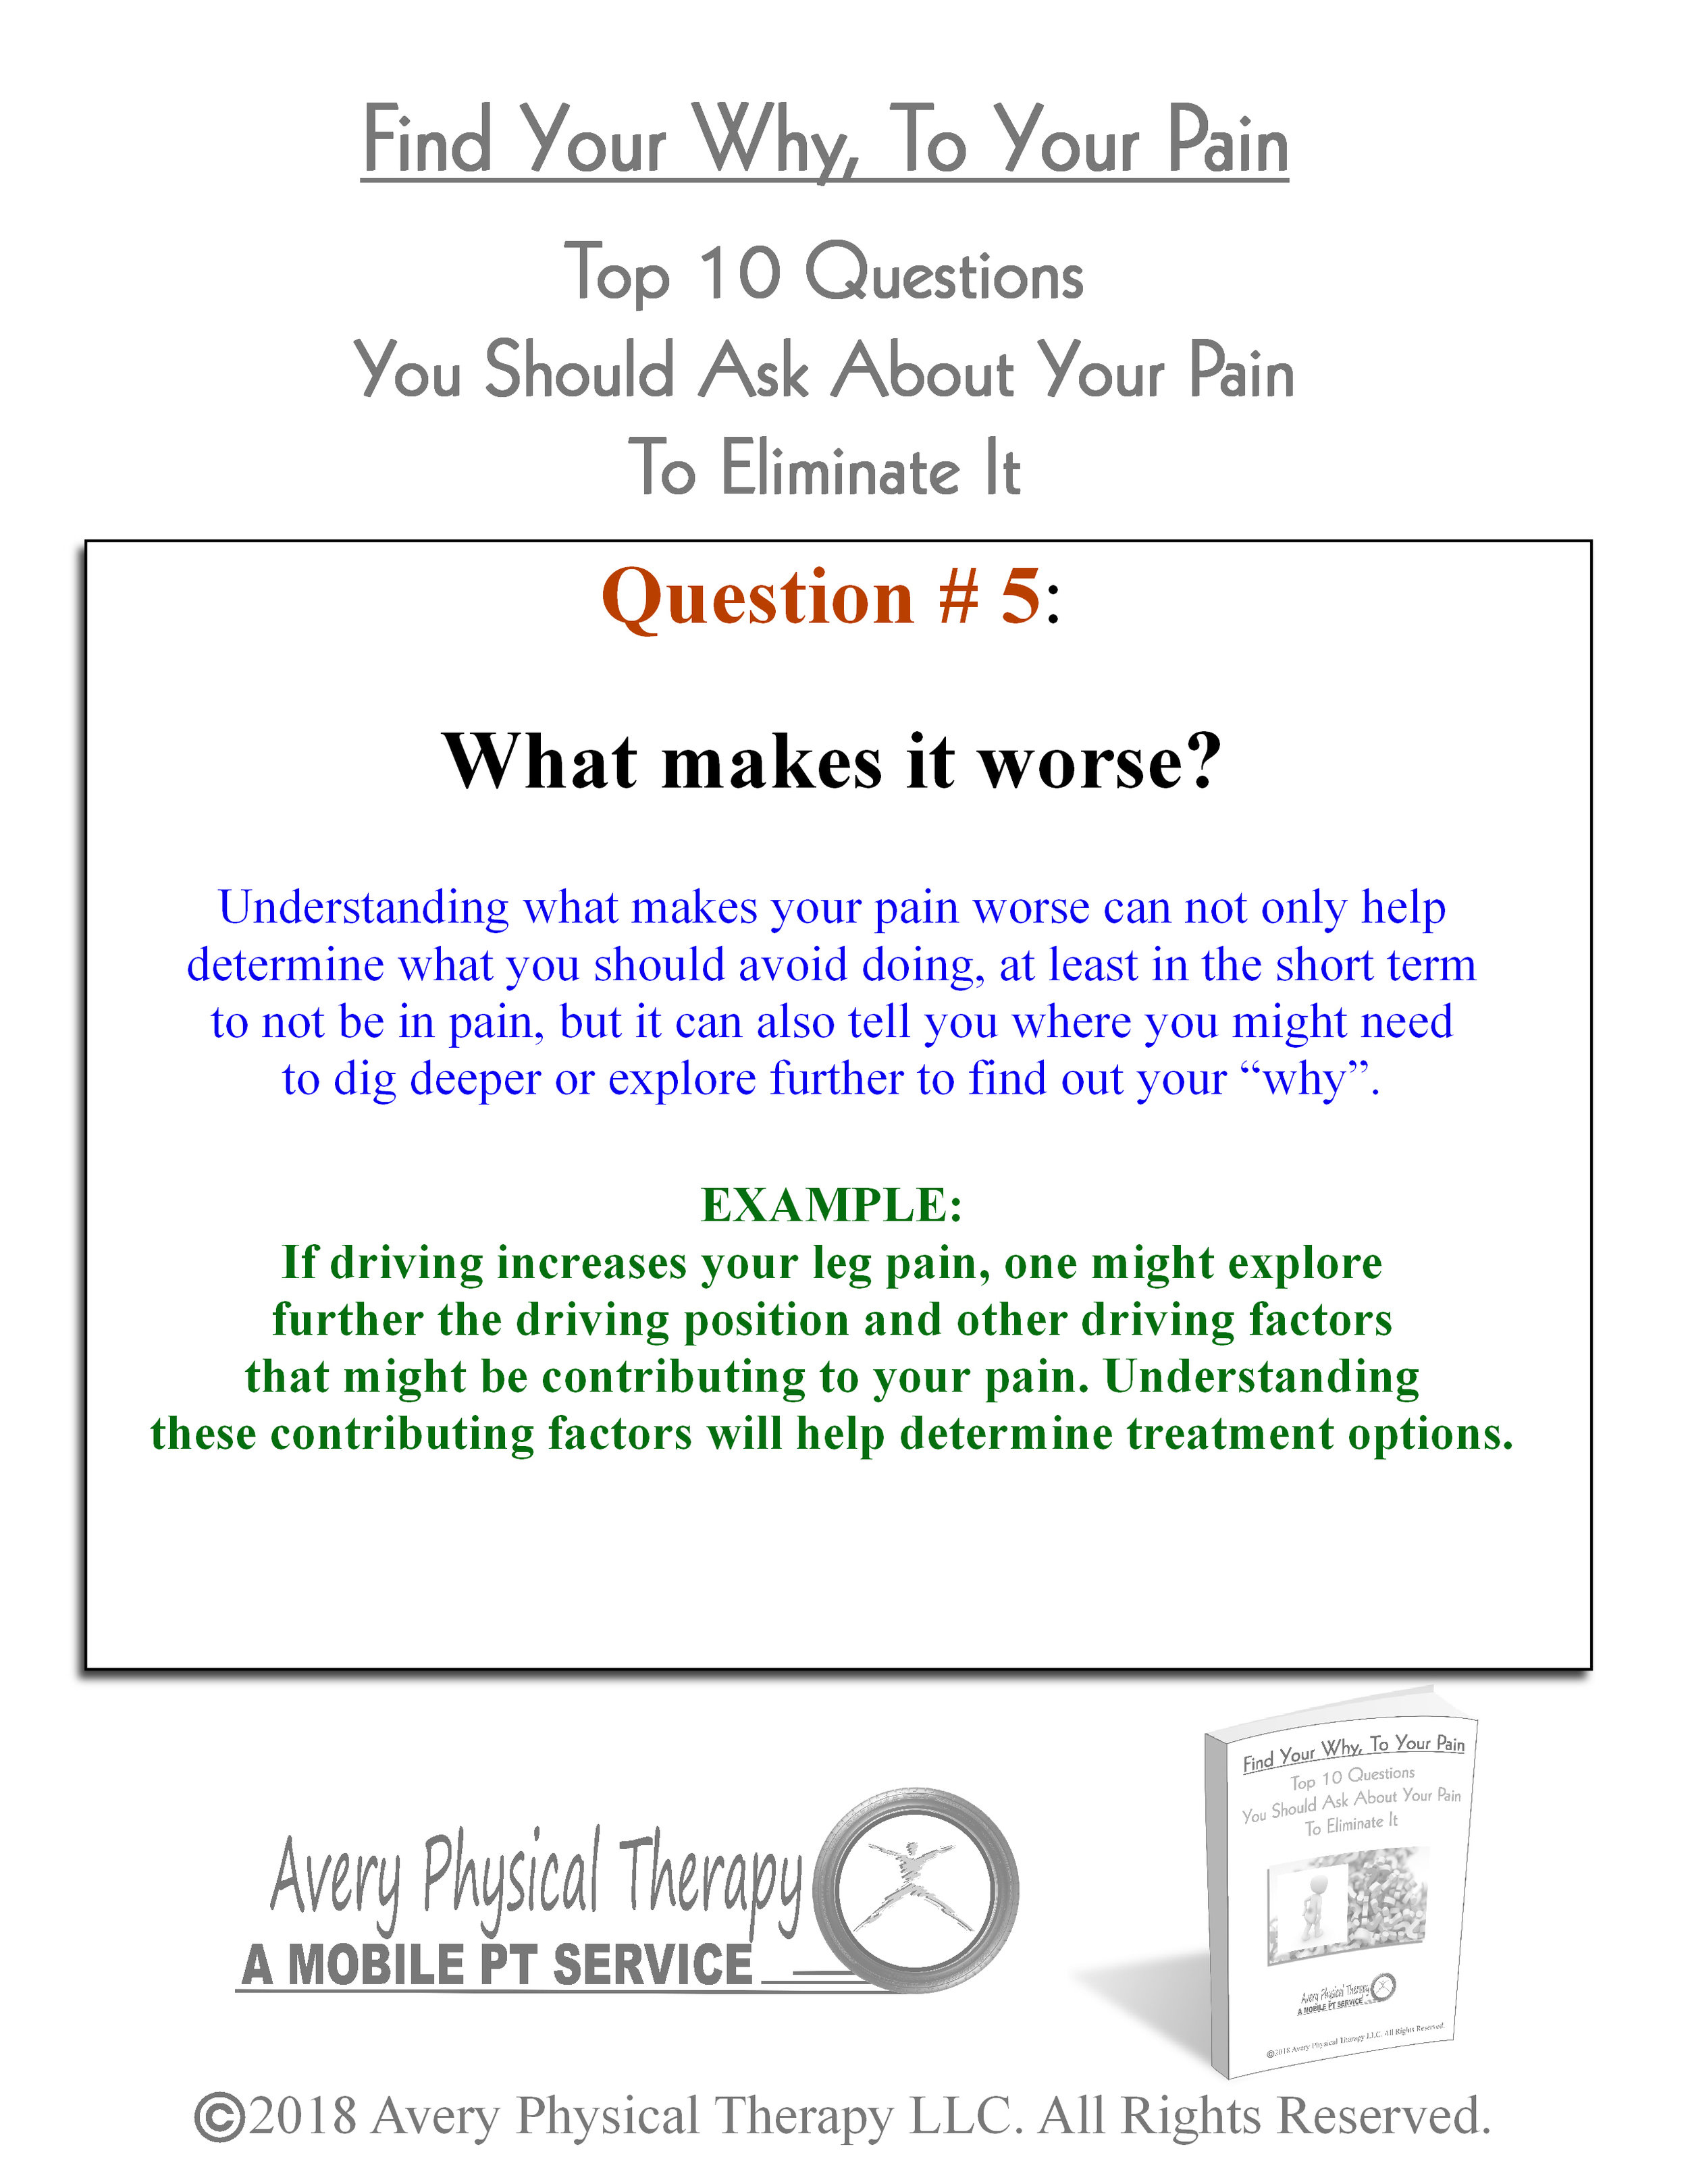 Top 10 Pain Questions 4-6F.JPG